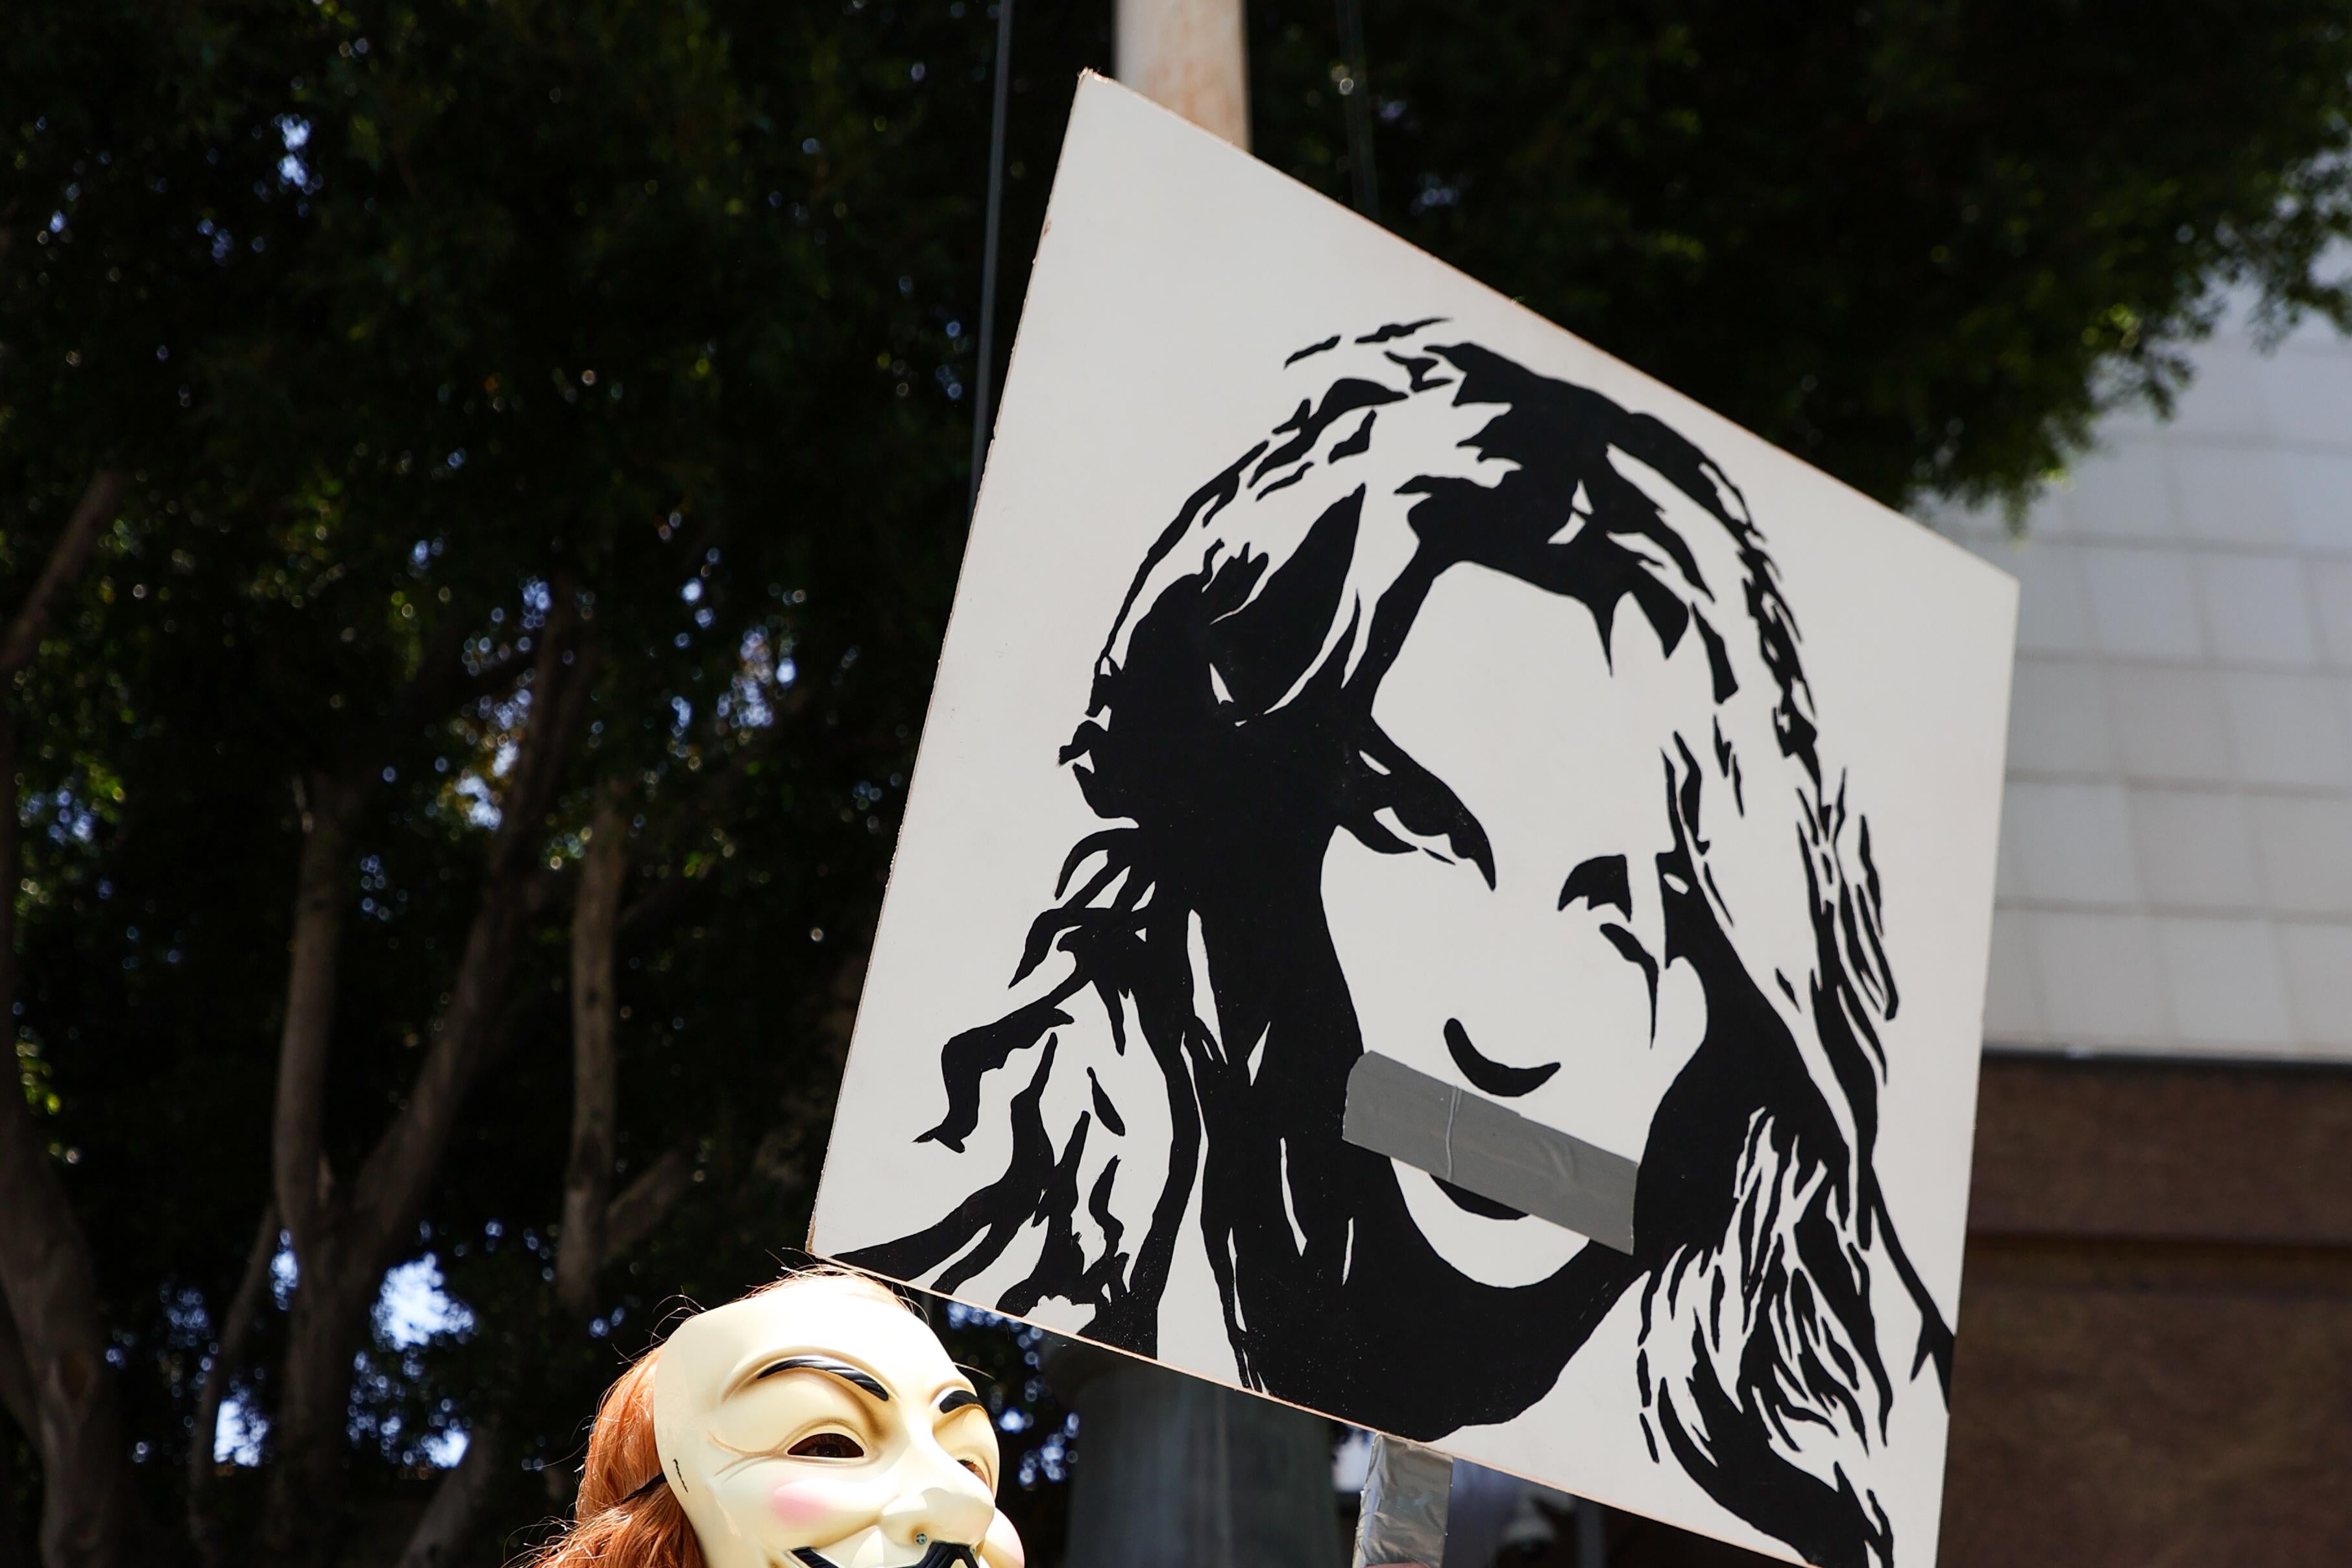 Person with red curly hair wearing a Guy Fawkes mask and a red shiny unitard holds a mic in one hand and a poster of Britney Spears with duct tape over her mouth in her other hand